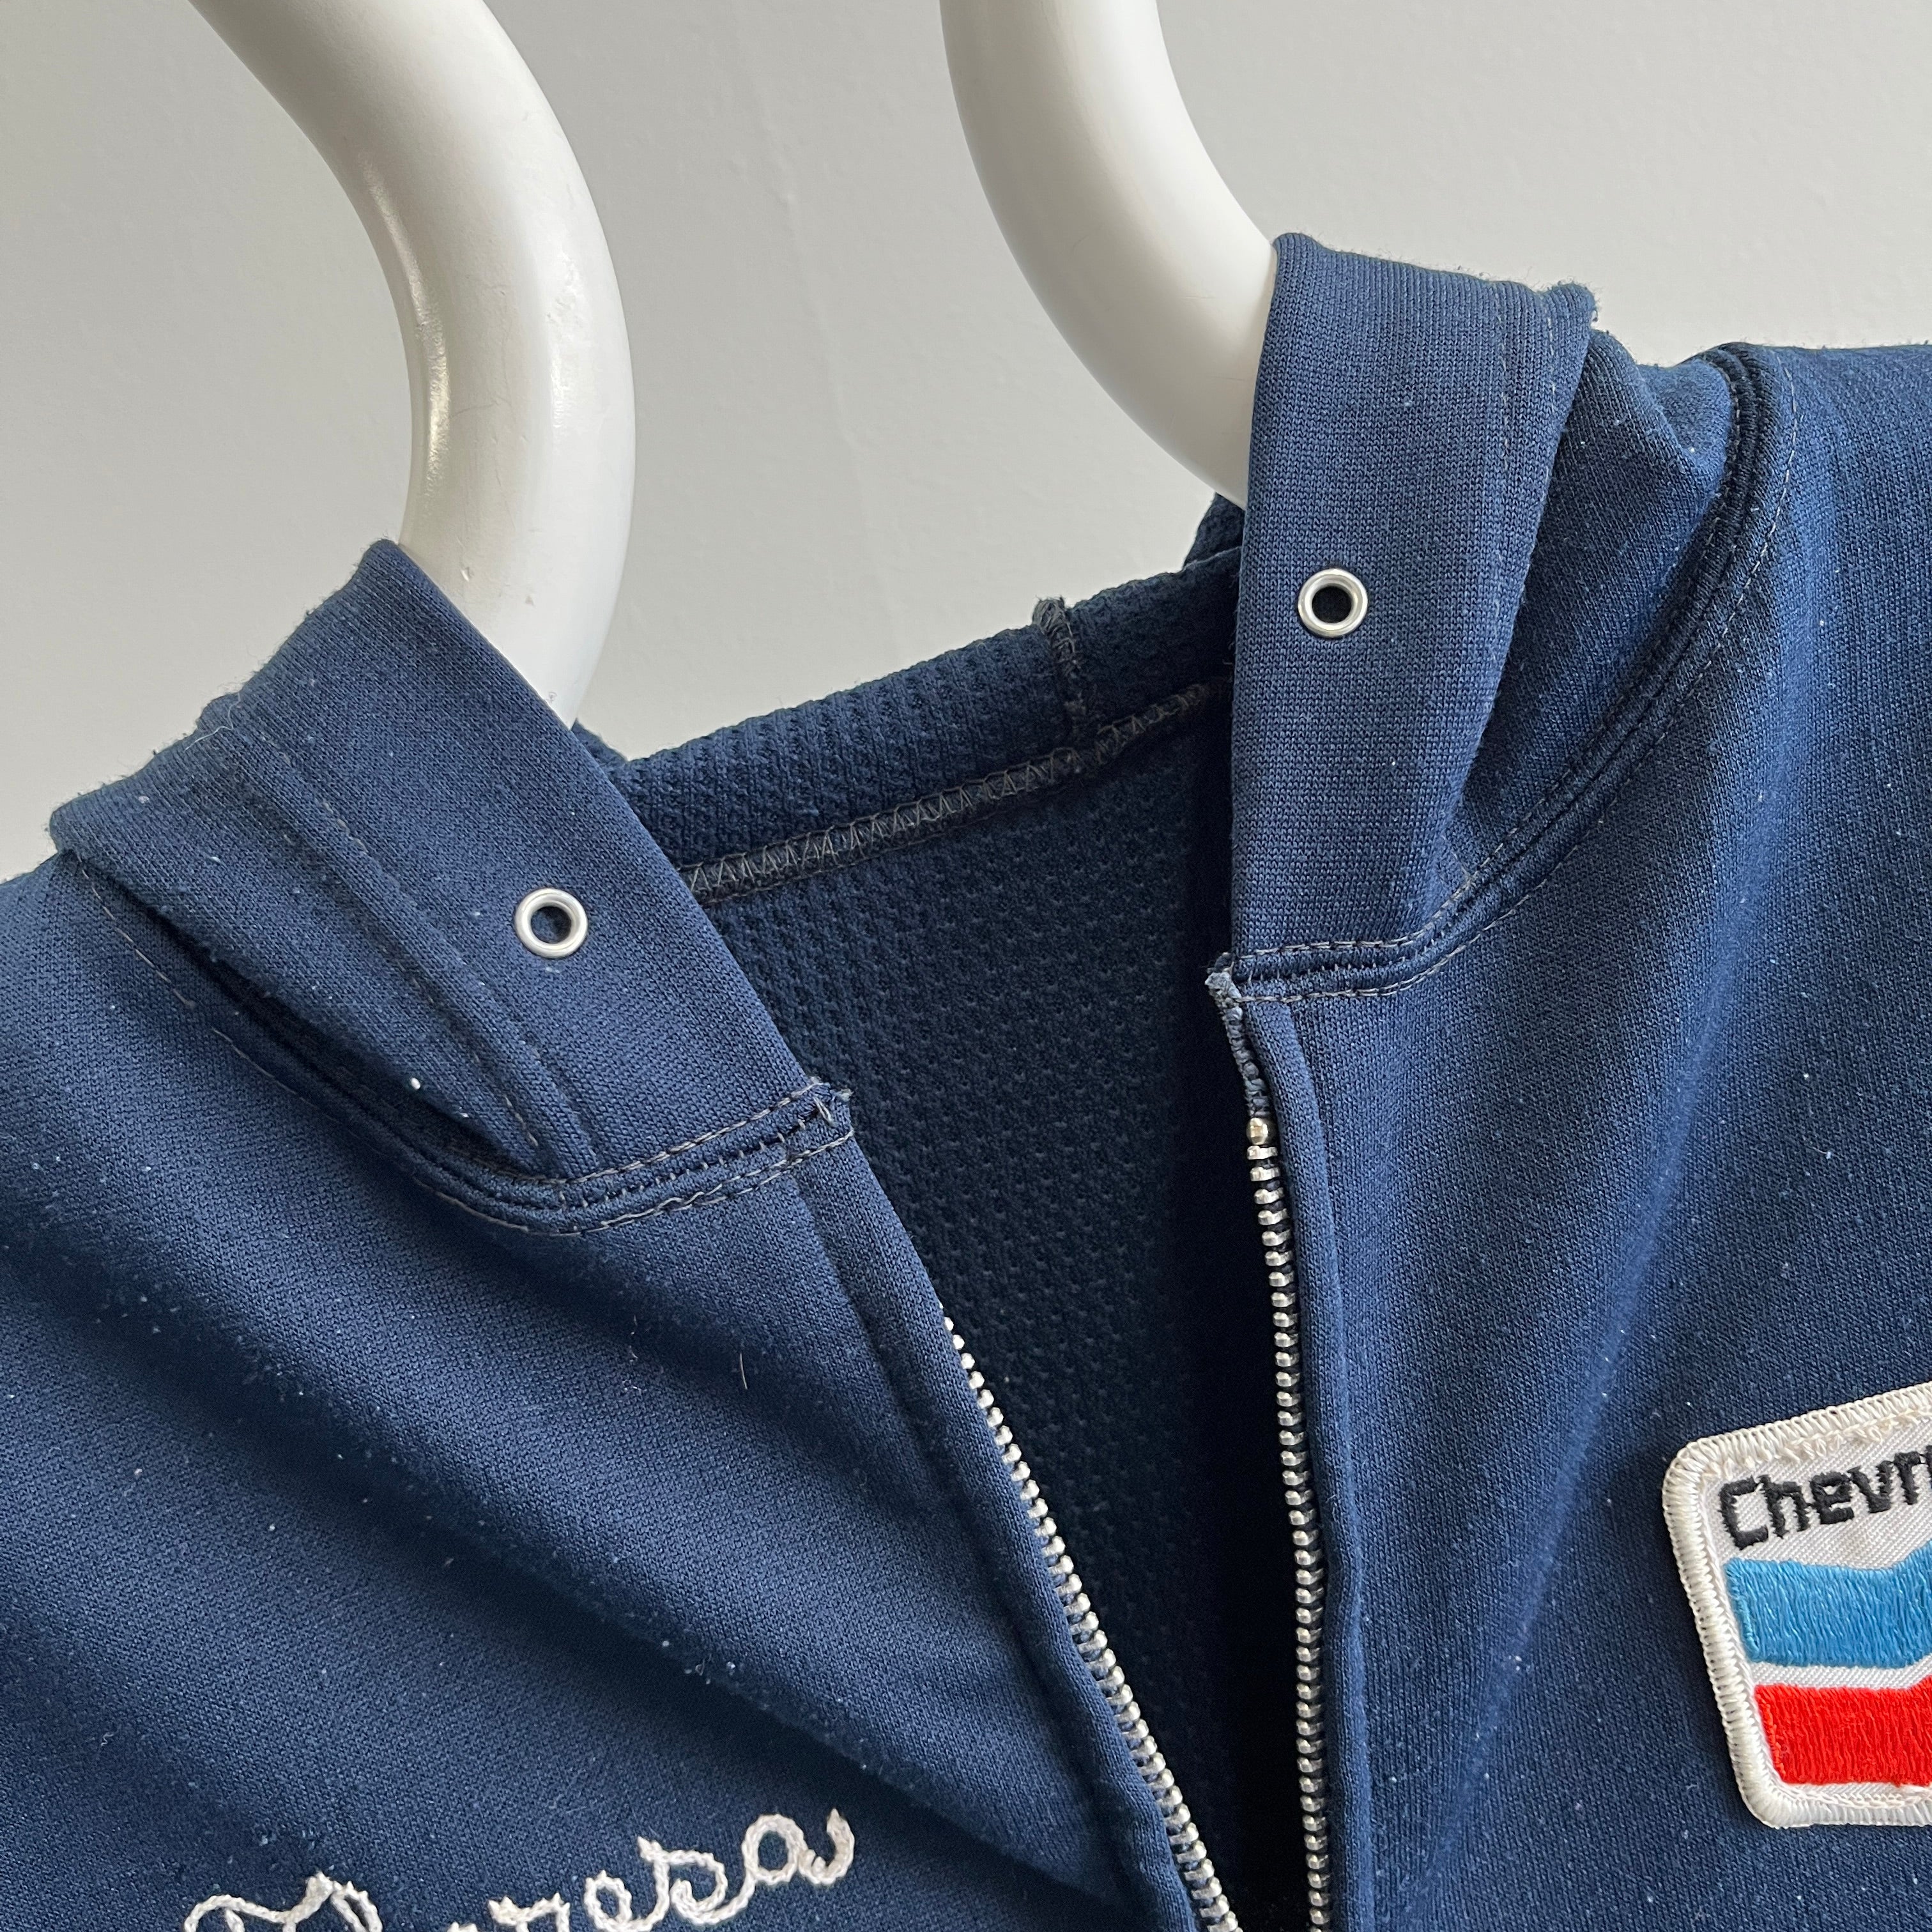 1970s Theresa's Chevron Gas Station Insulated Zip Up Hoodie